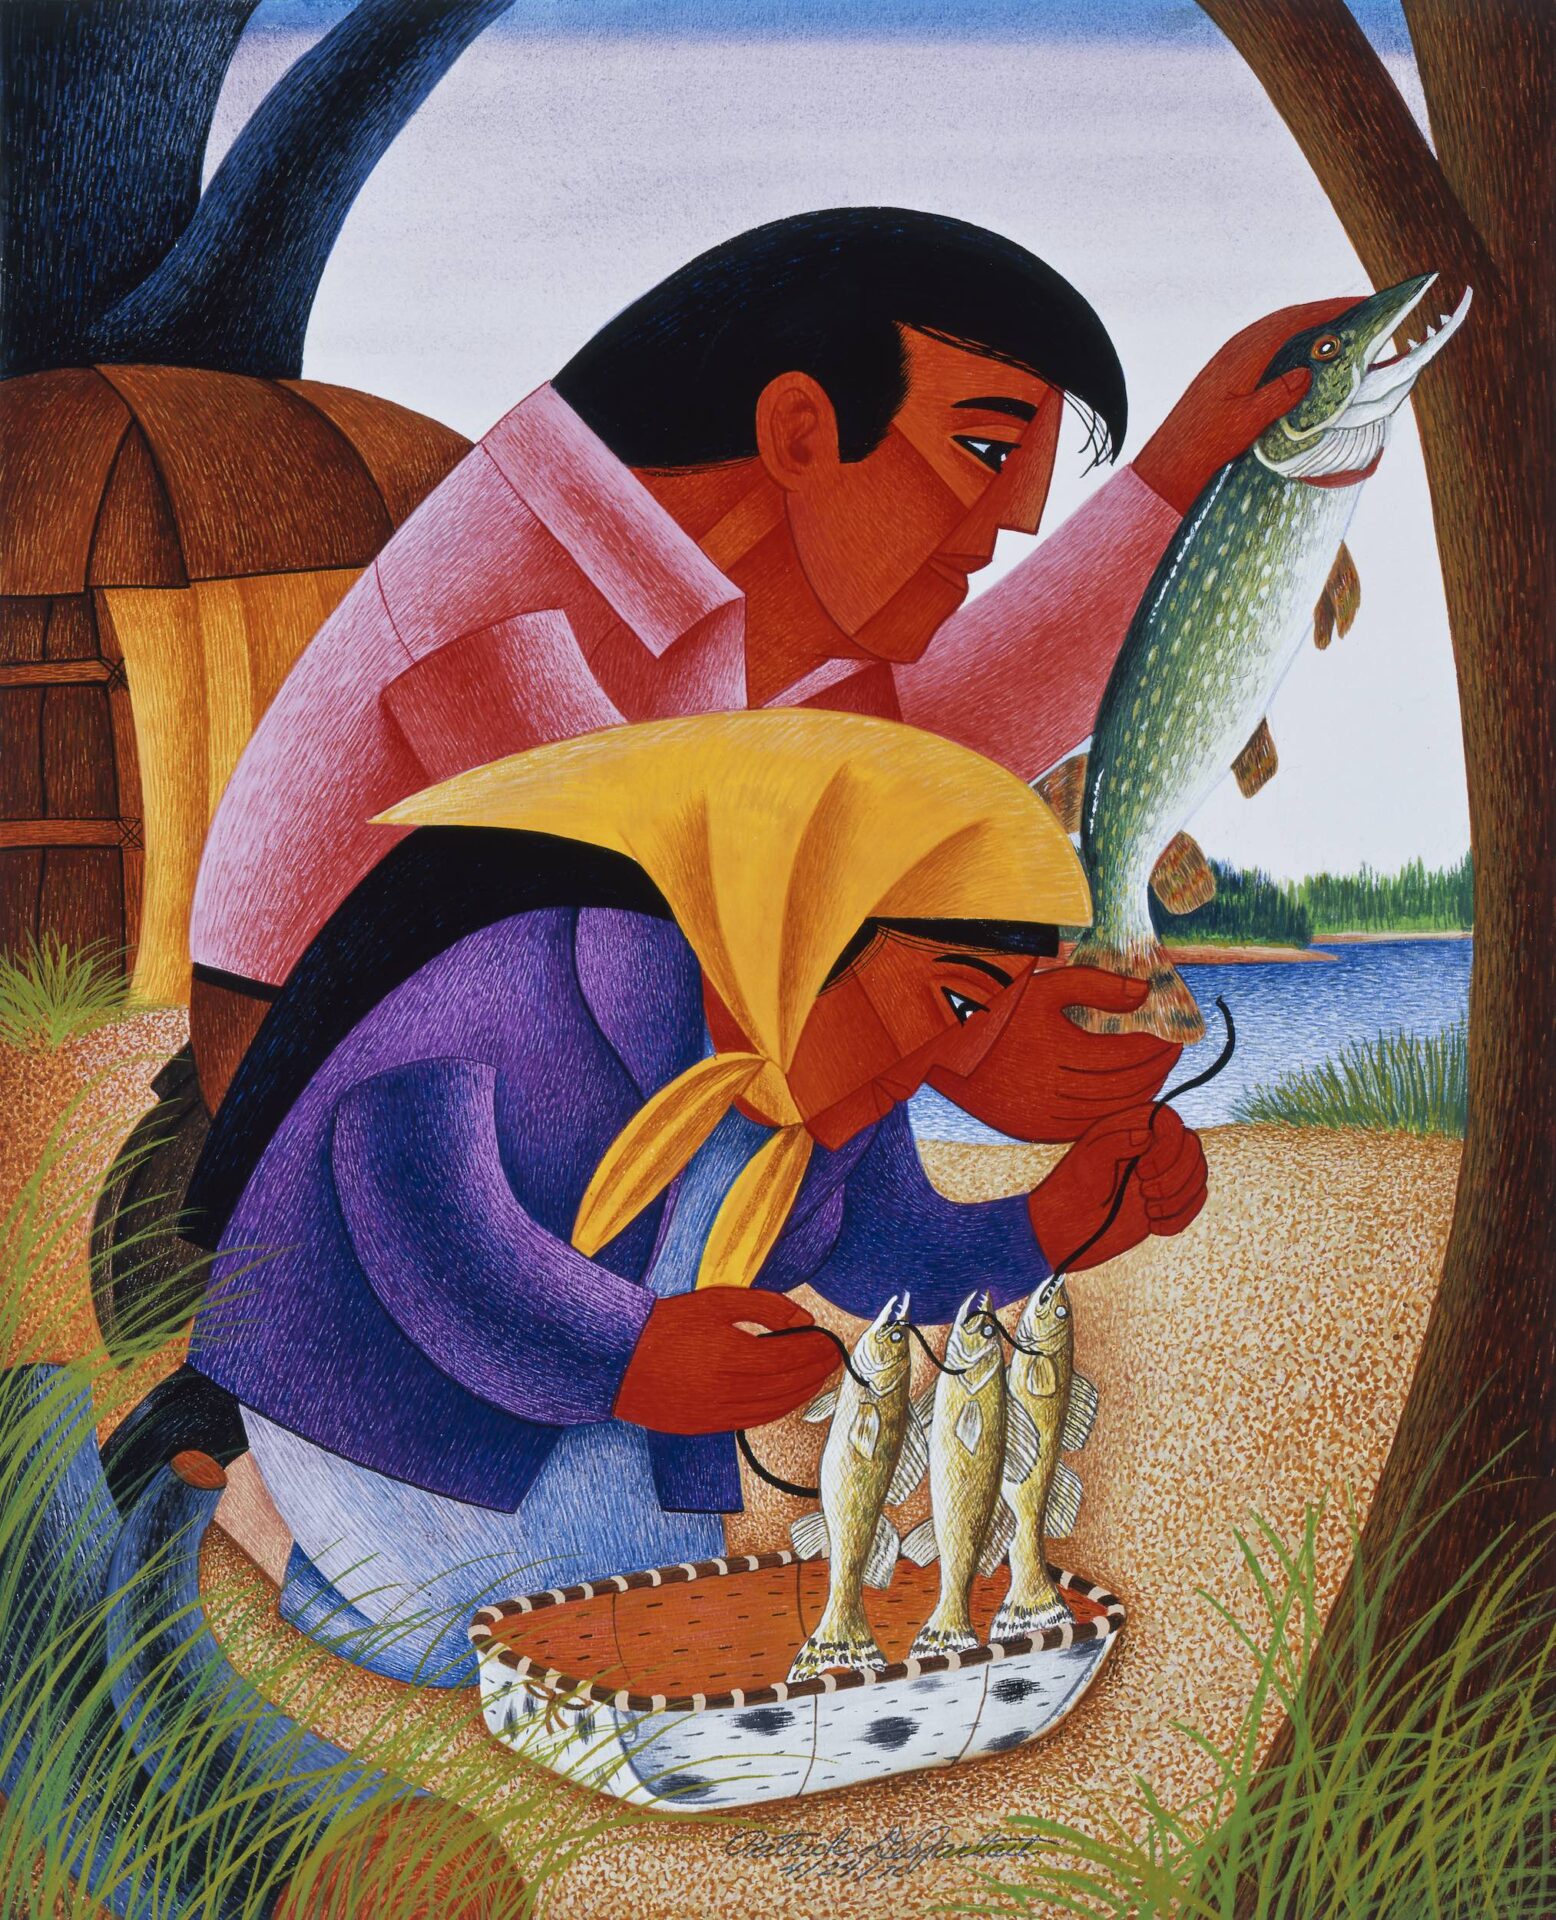 A painting of a Native woman and man holding a fish near a body of water.